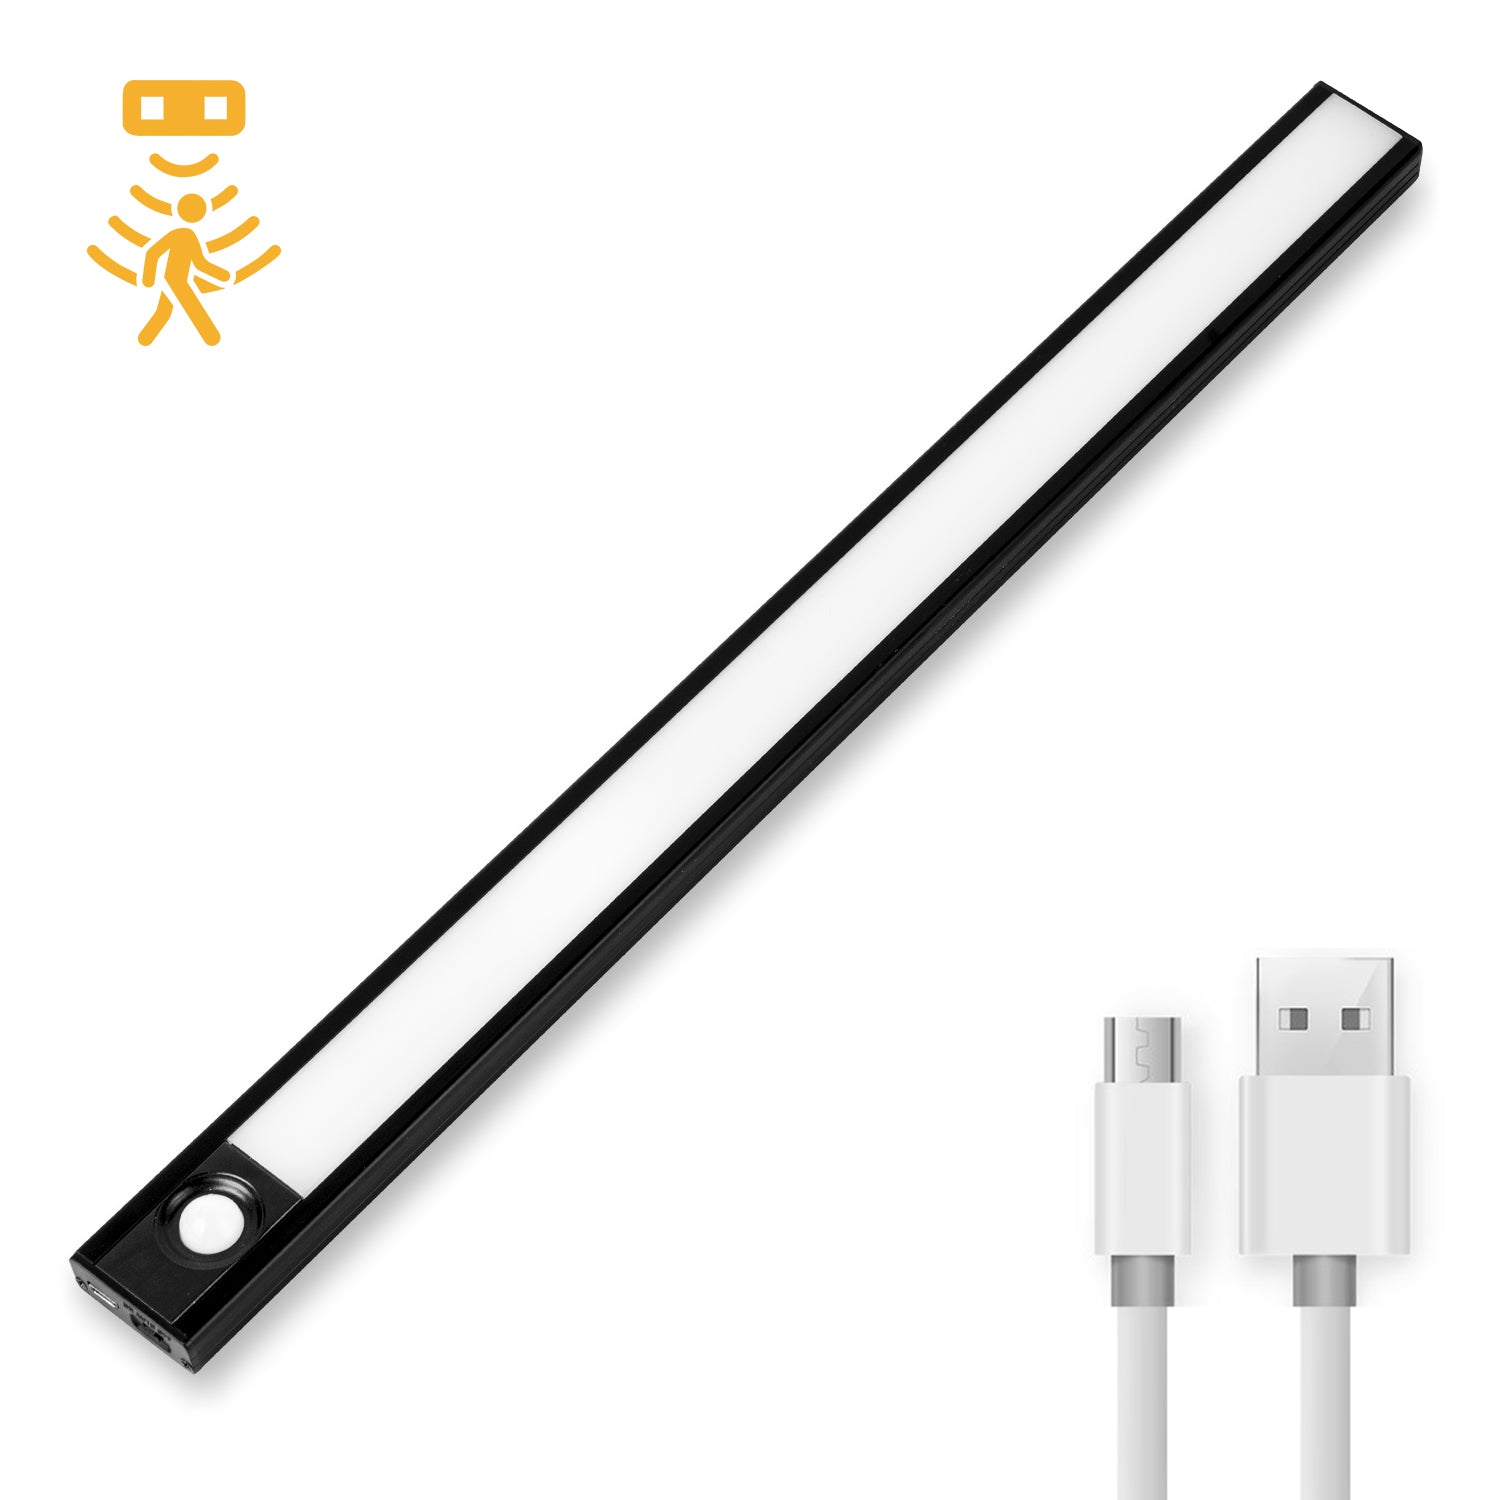 Ultra-thin LED Cabinet Lights with Smart Motion Sensor, Wireless USB Rechargeable, Best for Closet, Cabinet, Storage Room